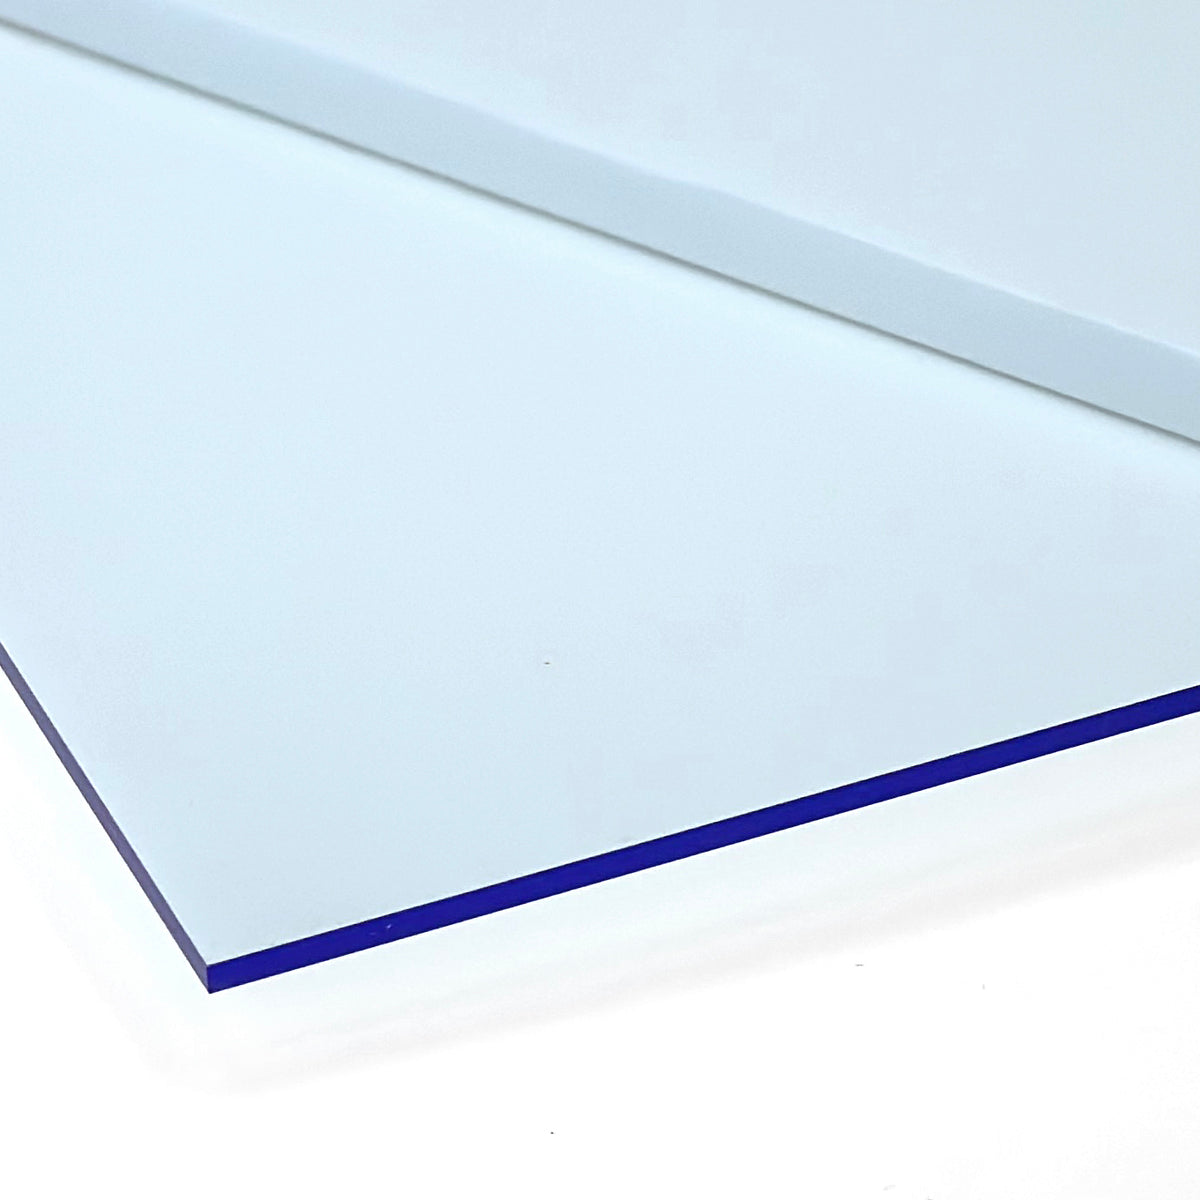 Blue Transparent Acrylic for Laser Cutting – MakerStock